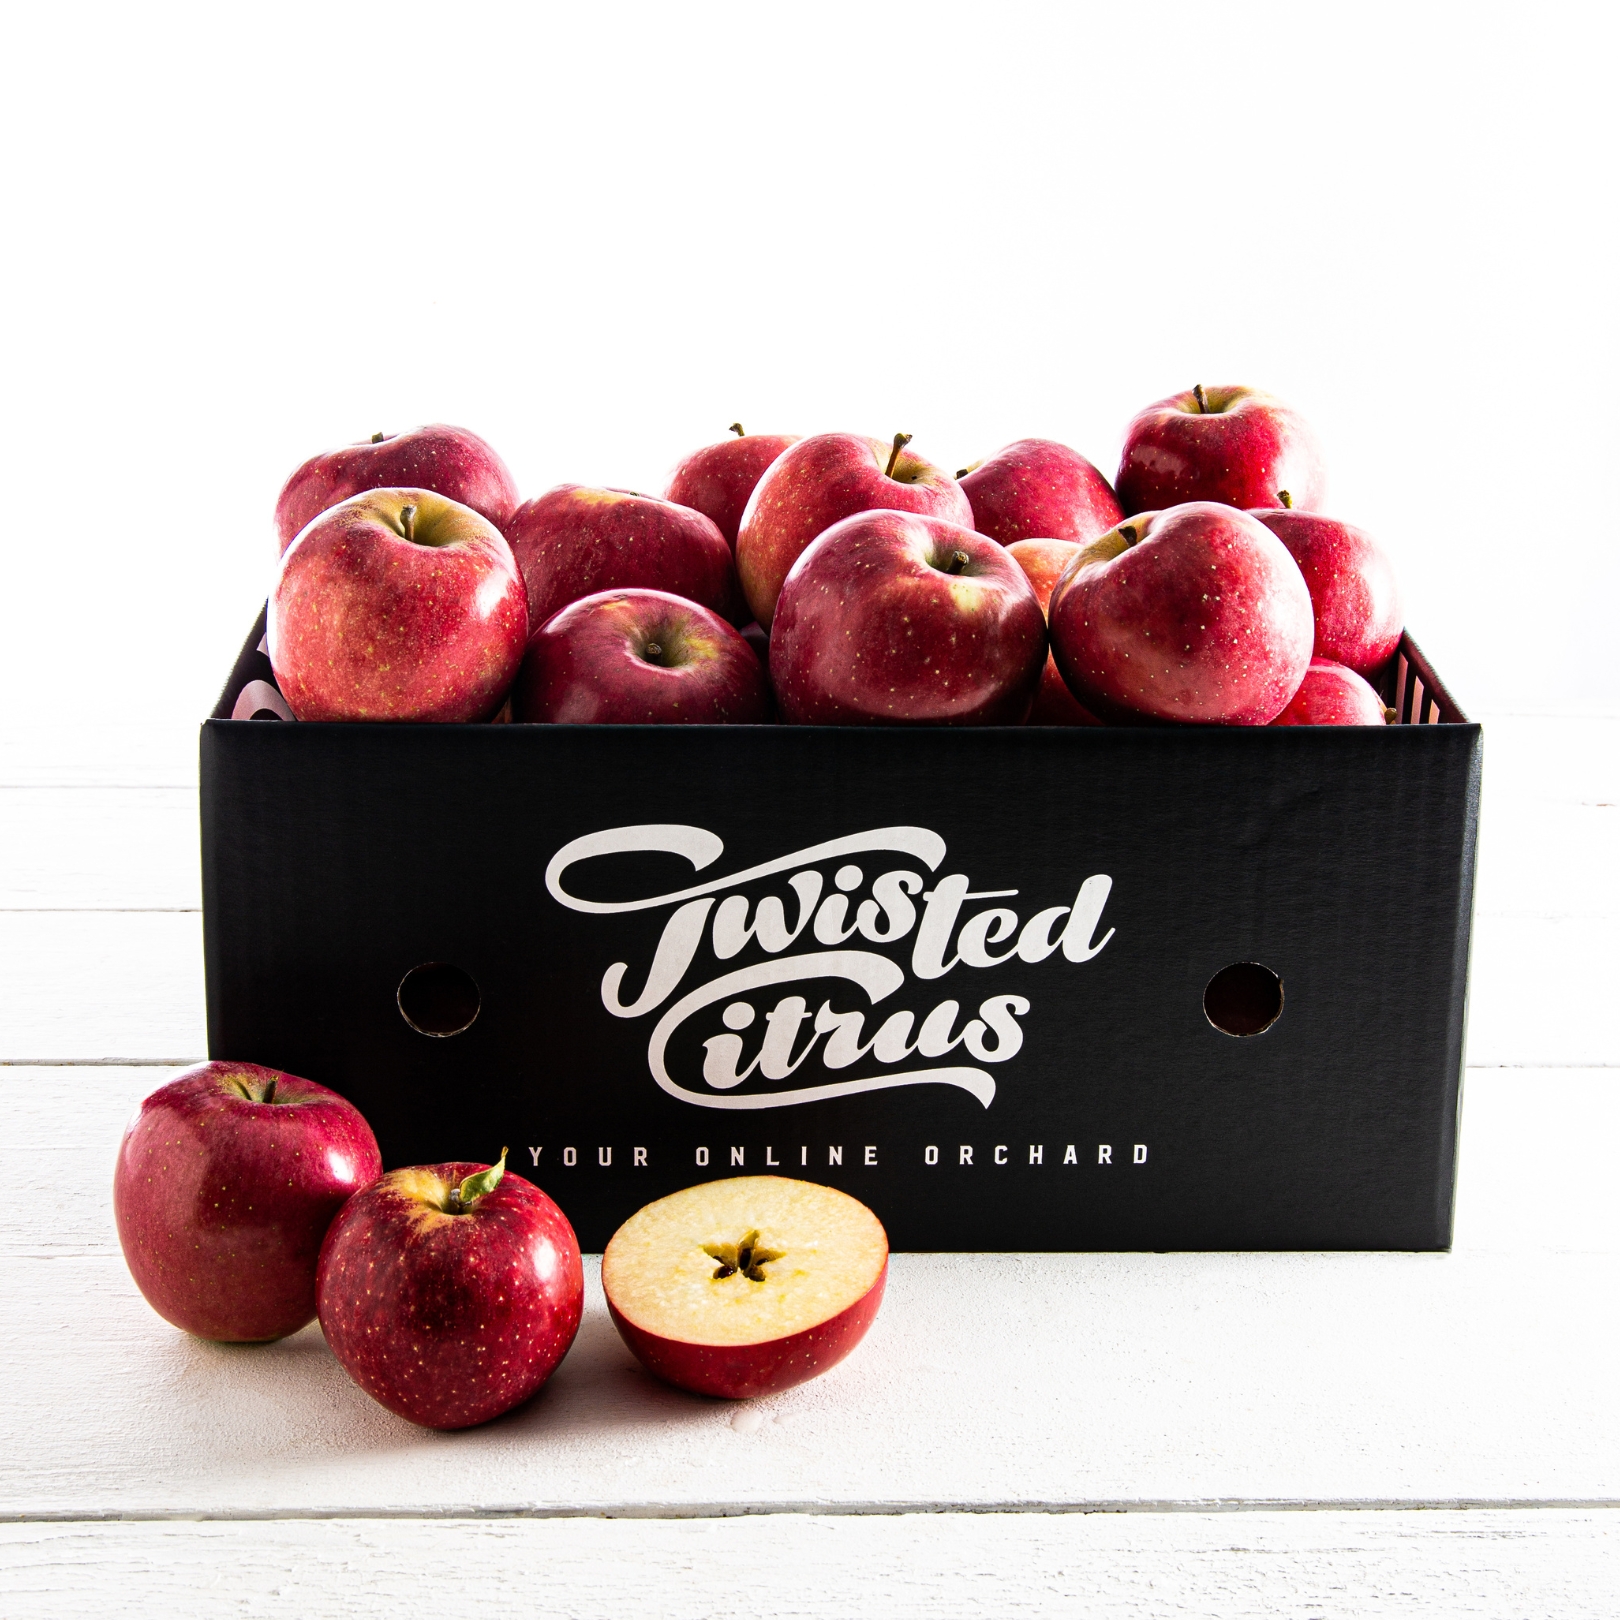 Apples - Pacific Rose fruit box delivery nz